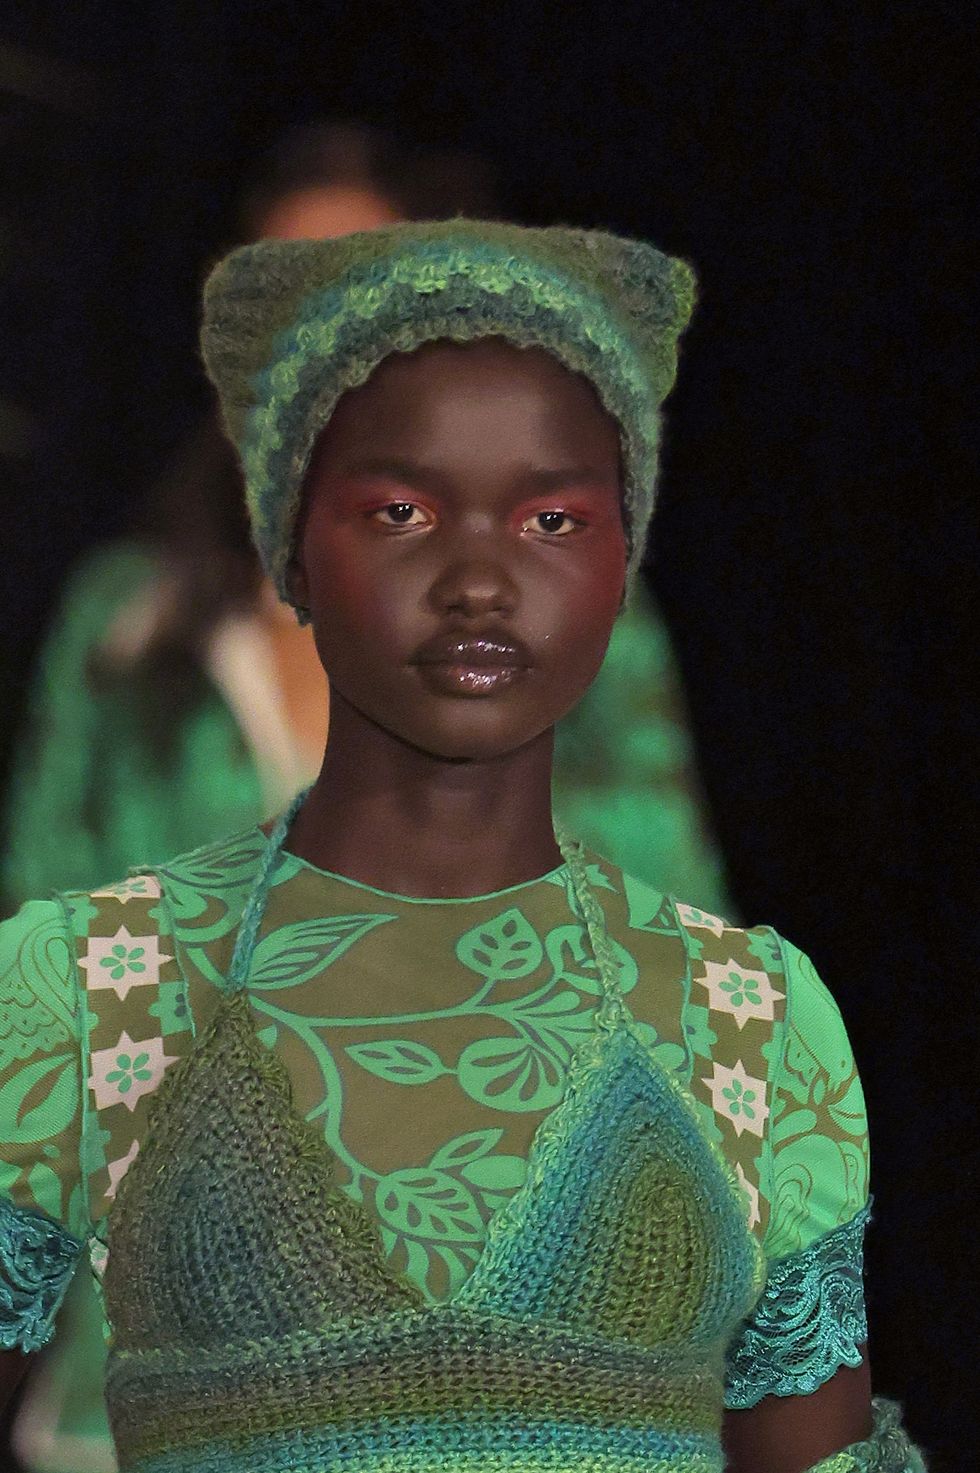 The 7 Biggest Spring 2022 Makeup Trends From Fashion Week